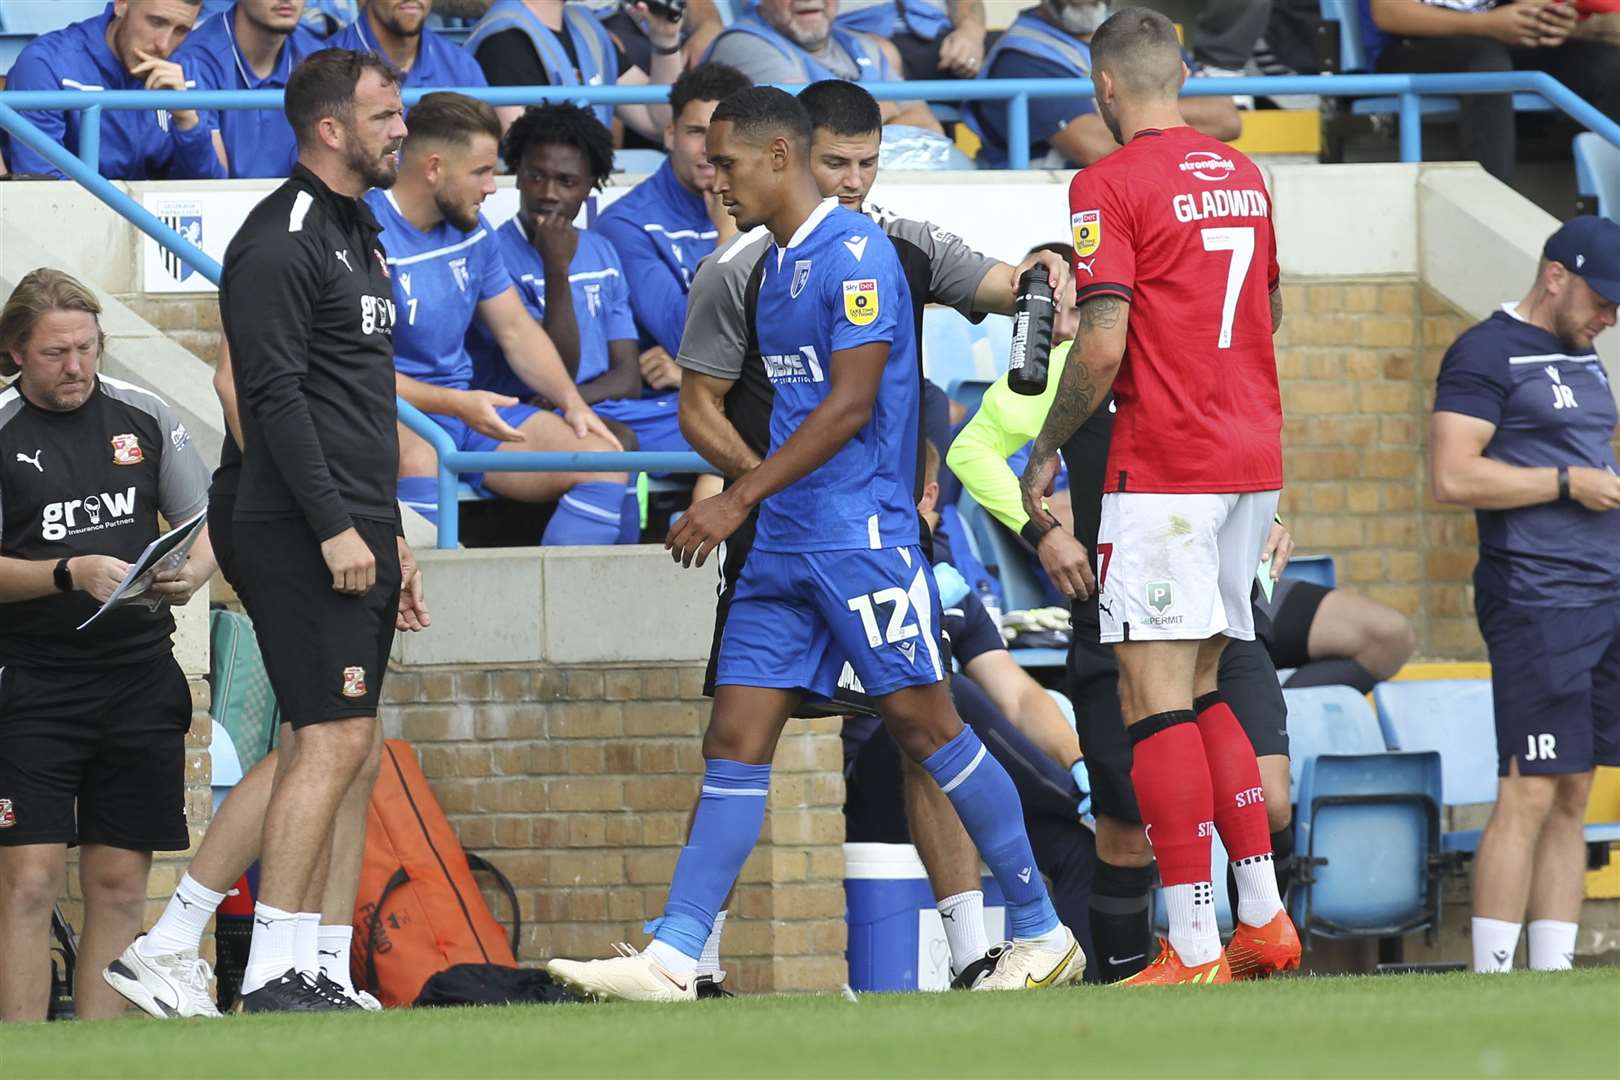 Haji Mnoga was sent off early in the game when Swindon played Gillingham at Priestfield in a goalless draw earlier this season